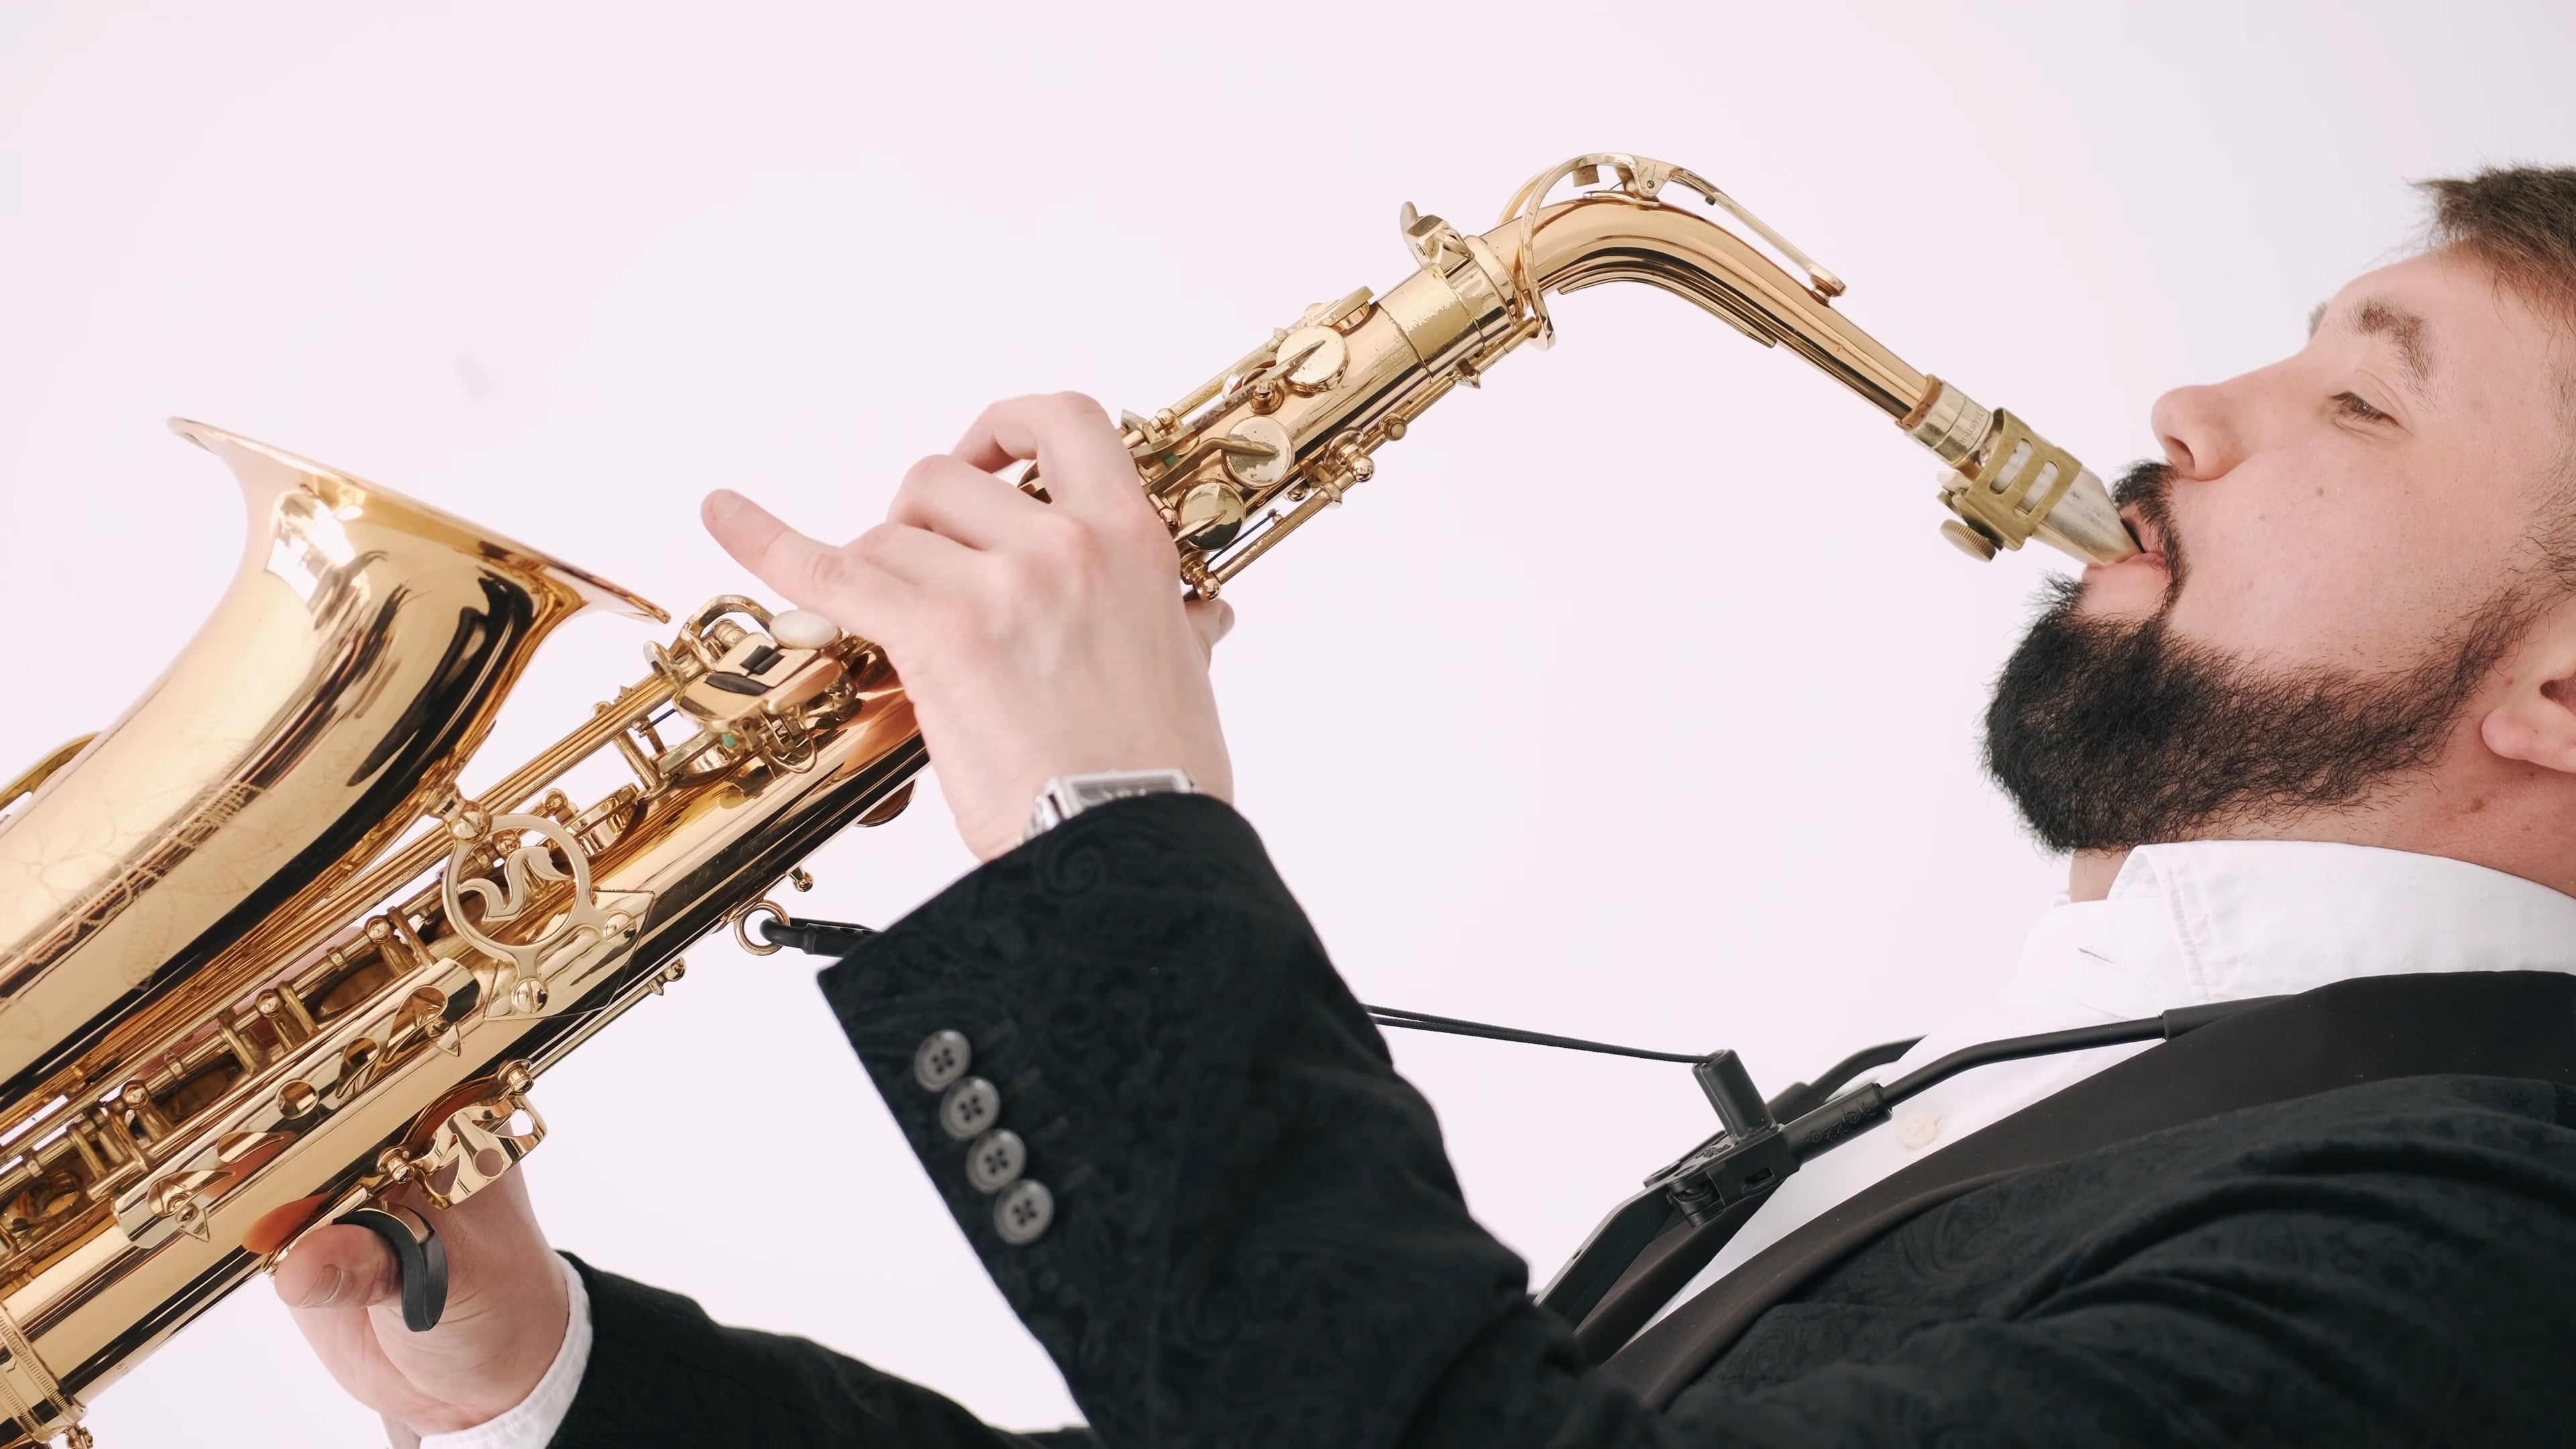 Saxophone: Man playing music, A type of single-reed woodwind instrument with a conical body. 3840x2160 4K Background.